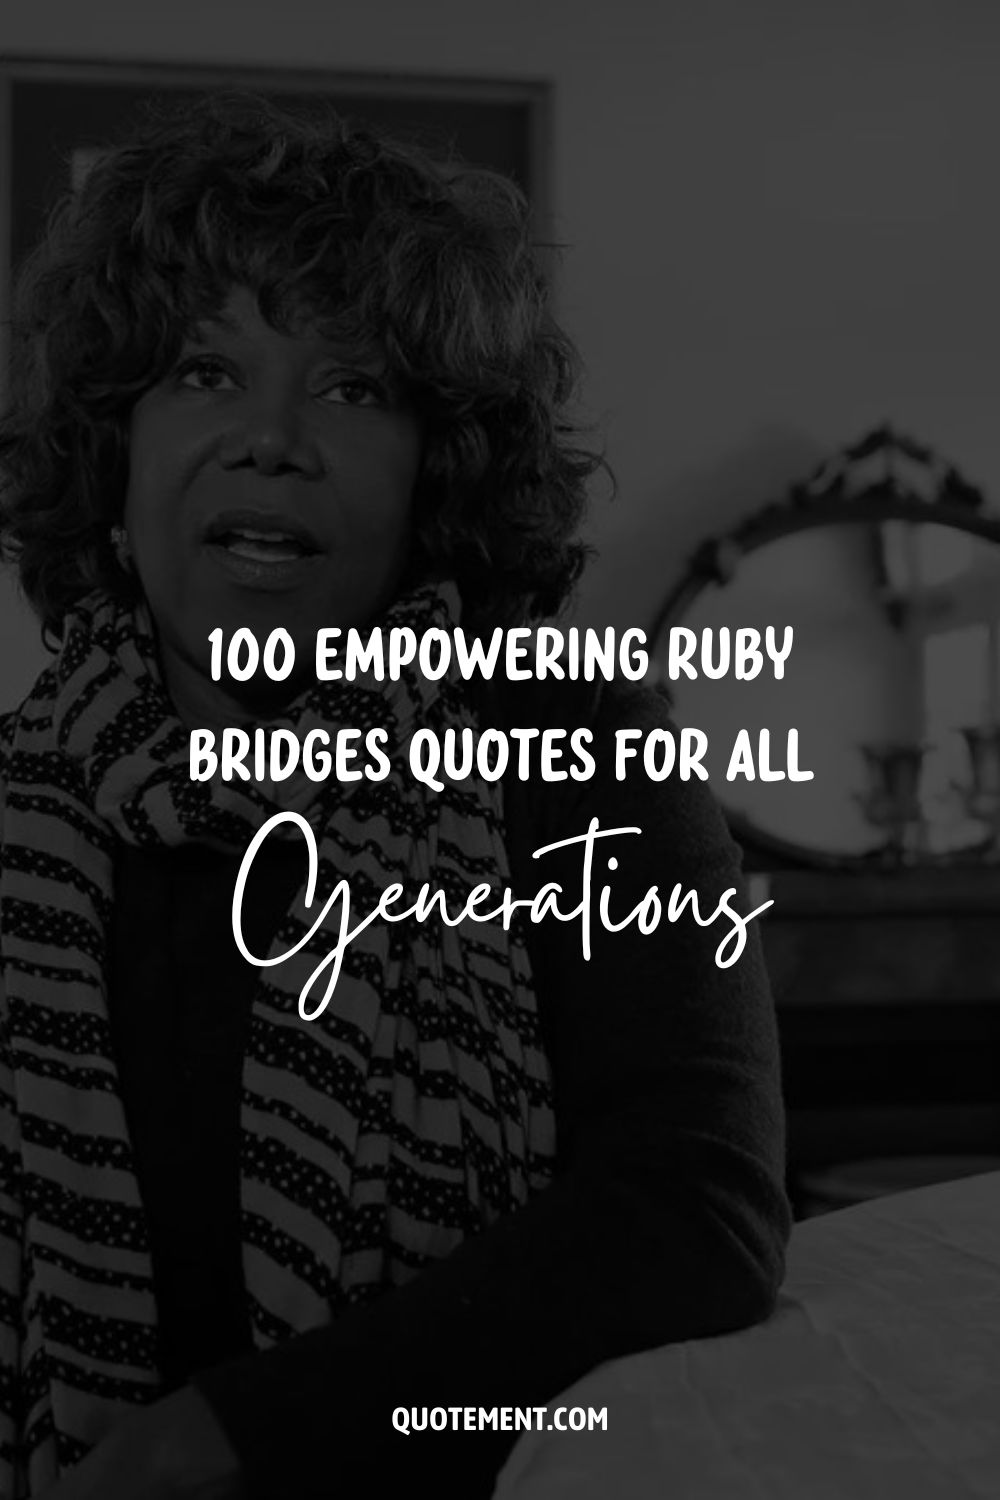 100 Empowering Ruby Bridges Quotes For All Generations 